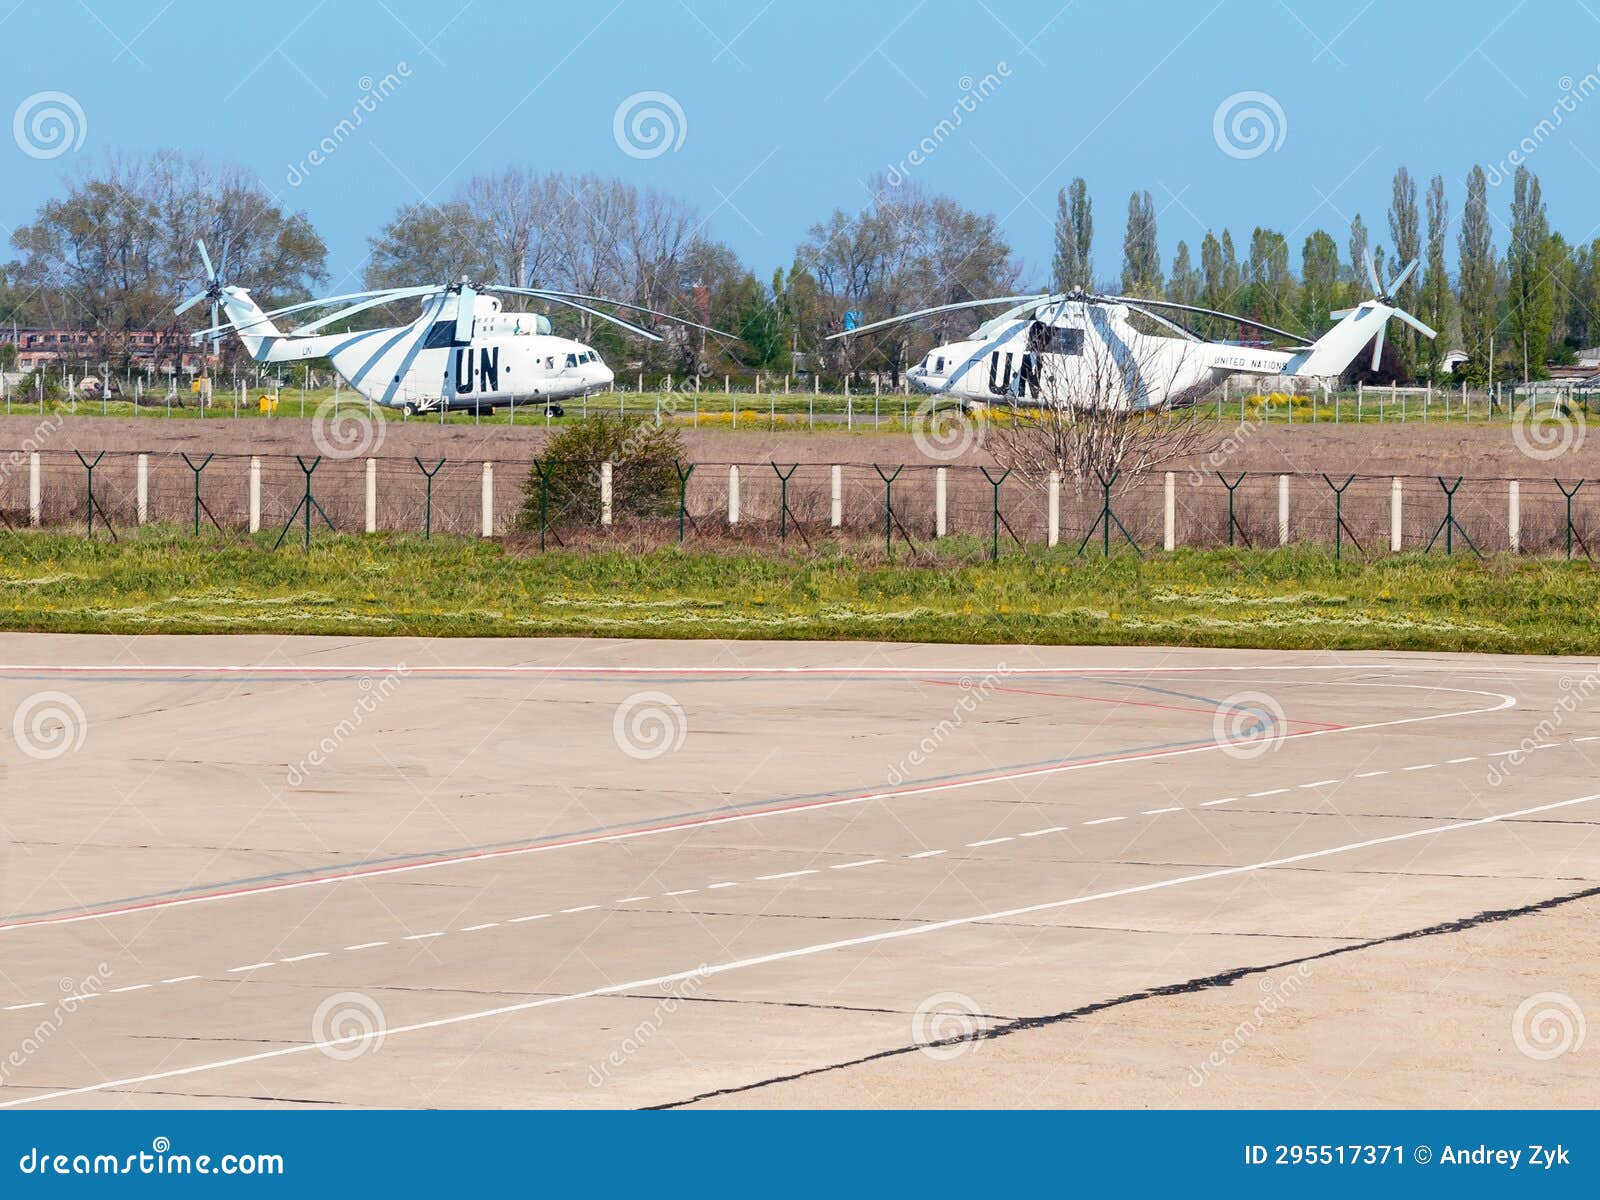 un helicopters on the airfield